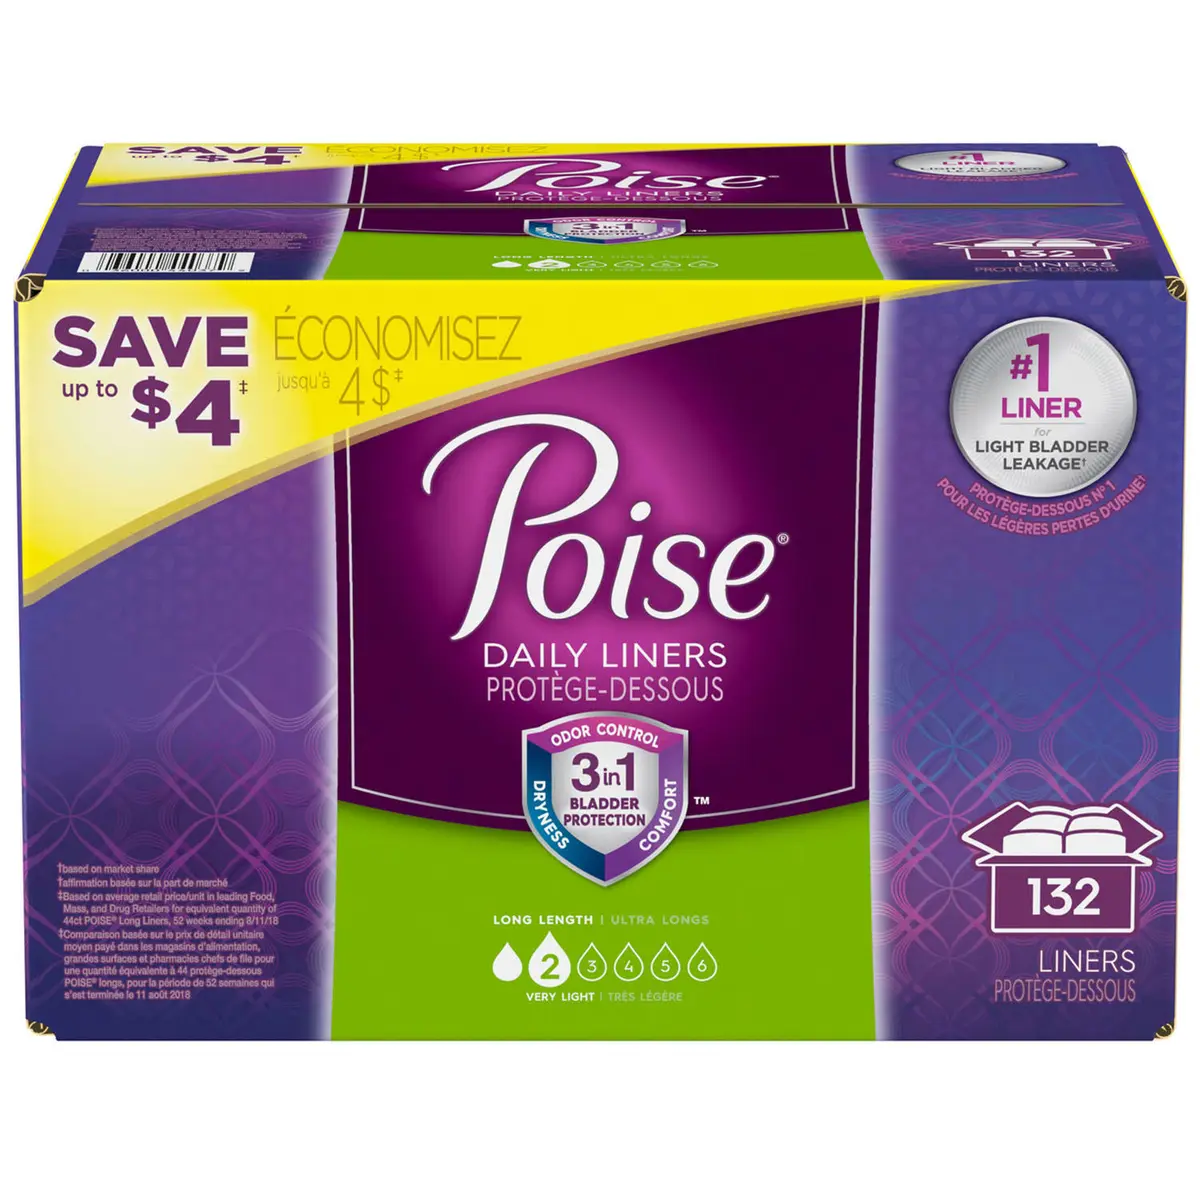 Poise Daily Incontinence Panty Liners, Very Light 2 Long (ct 44)